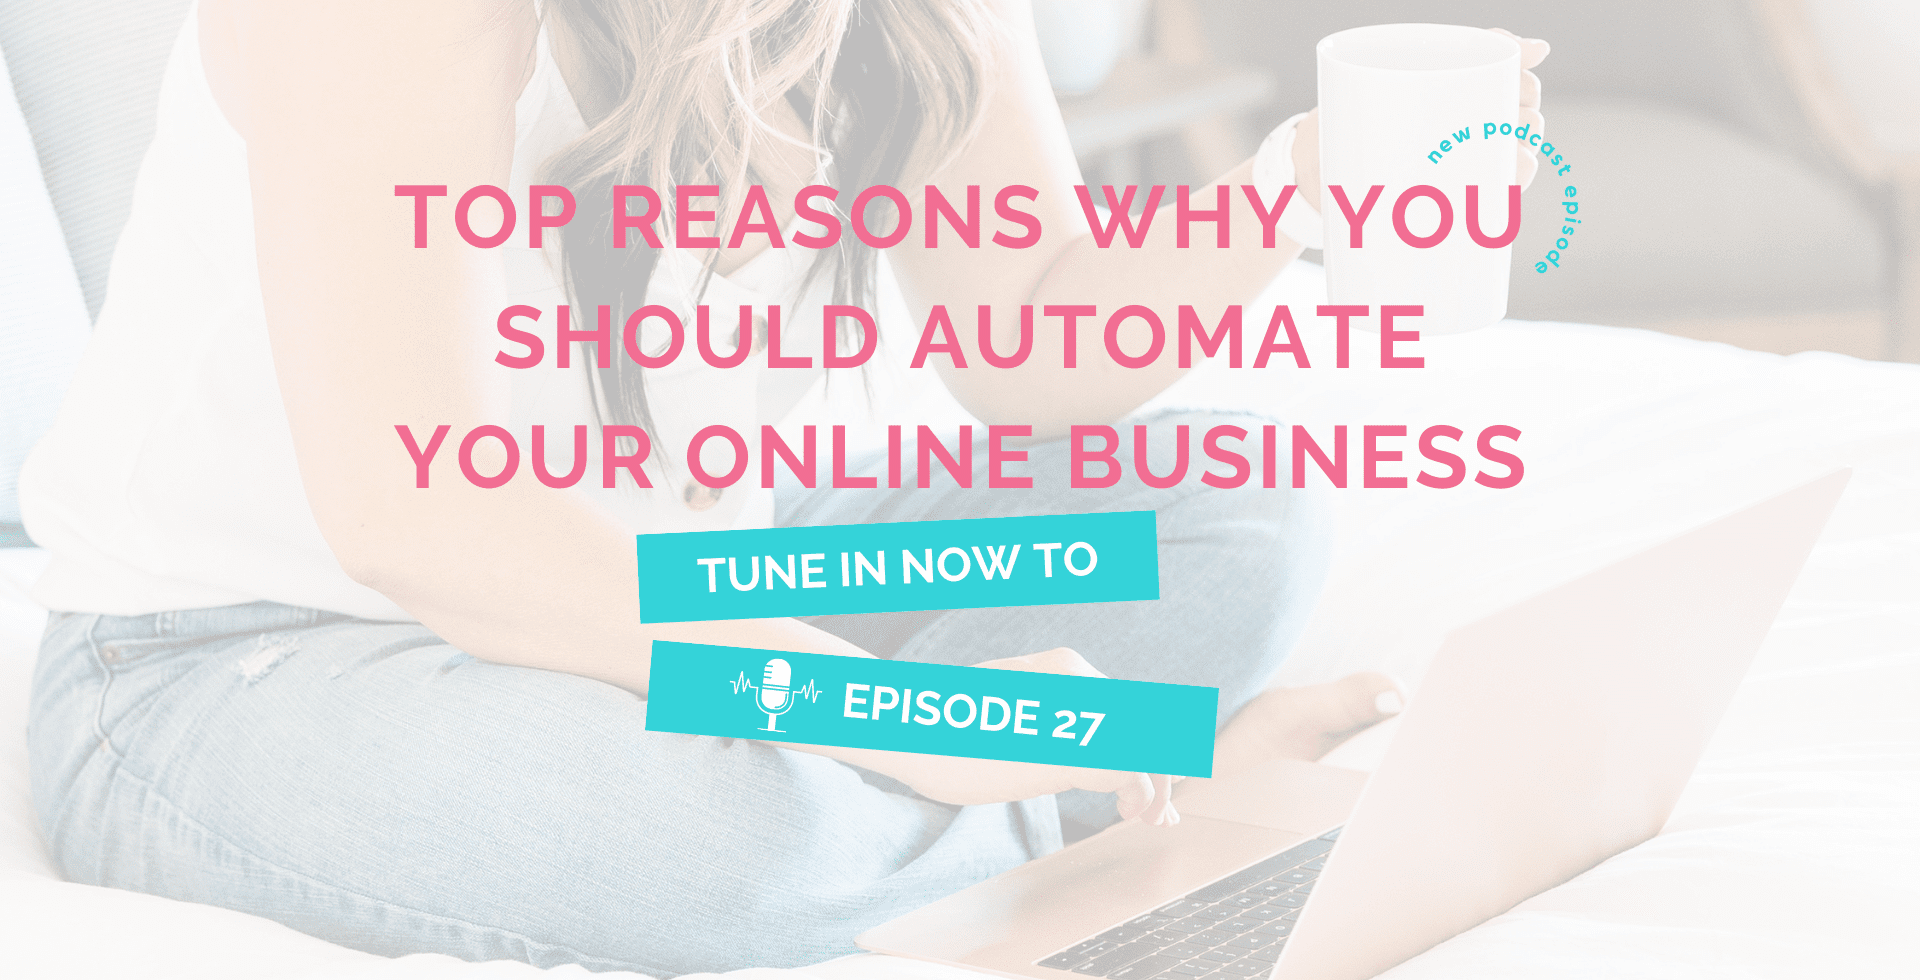 Top Reasons Why You Should Automate Your Online Business